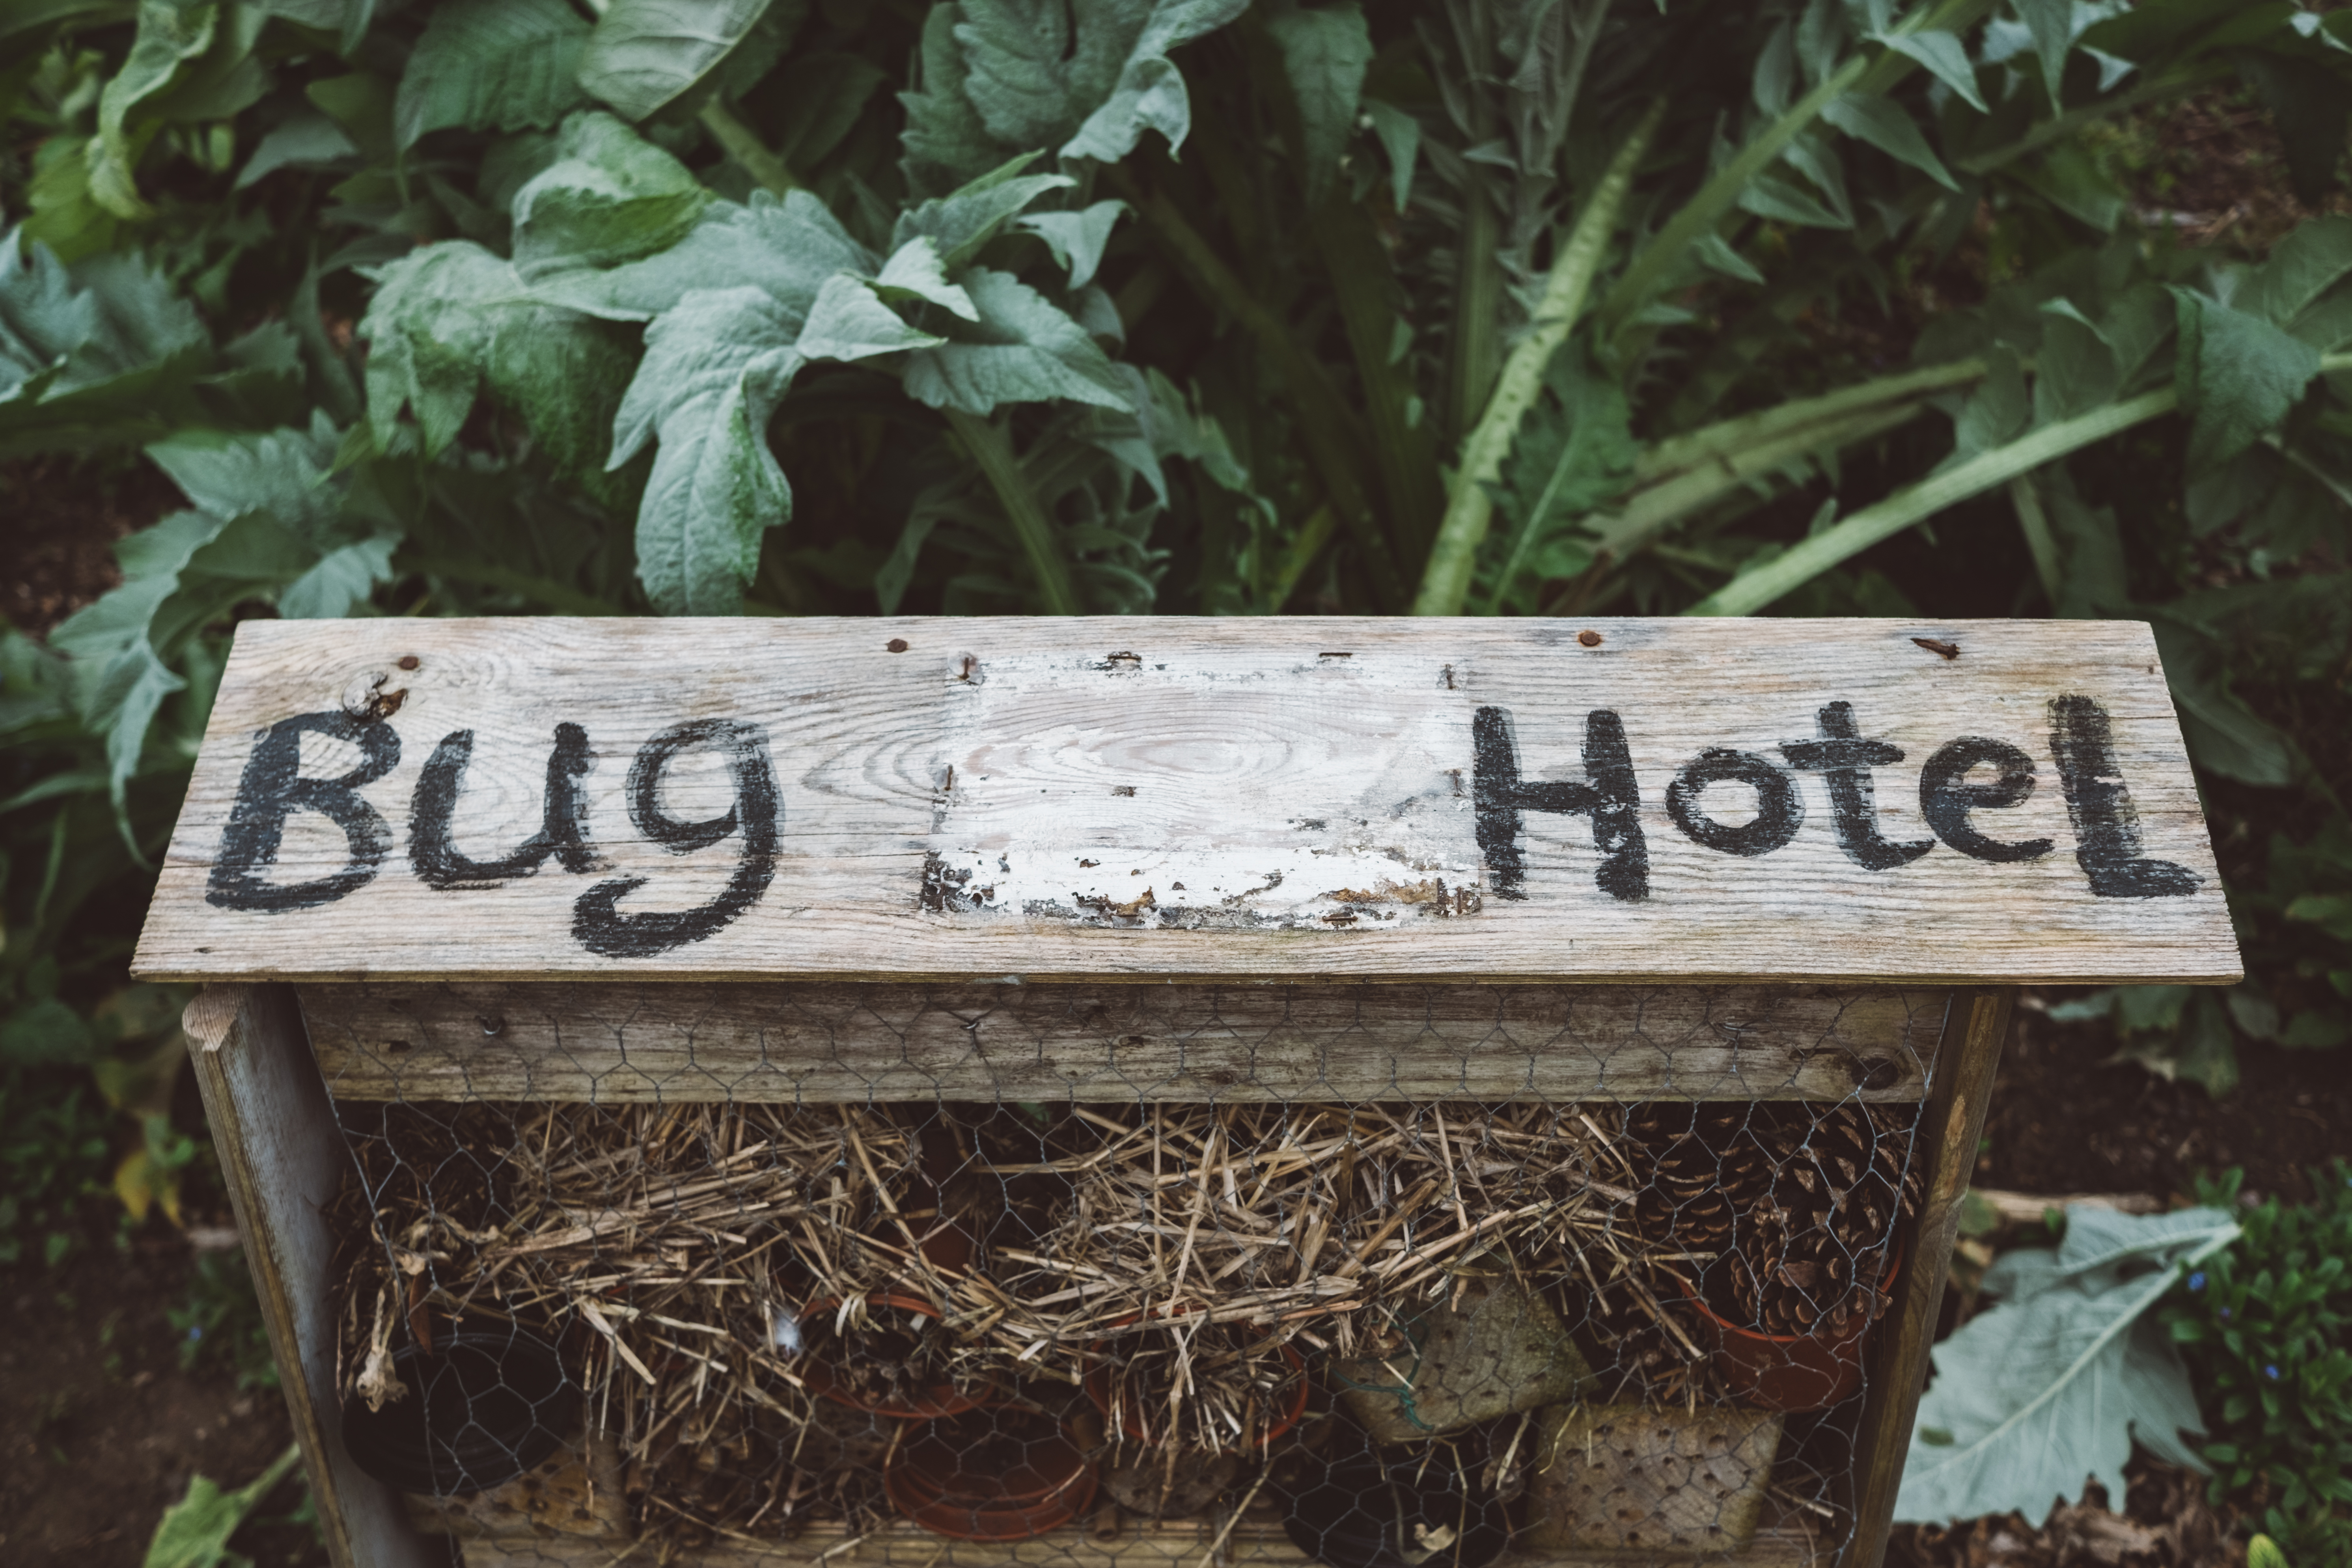 Wooden bug hotel with a "bug hotel" sign